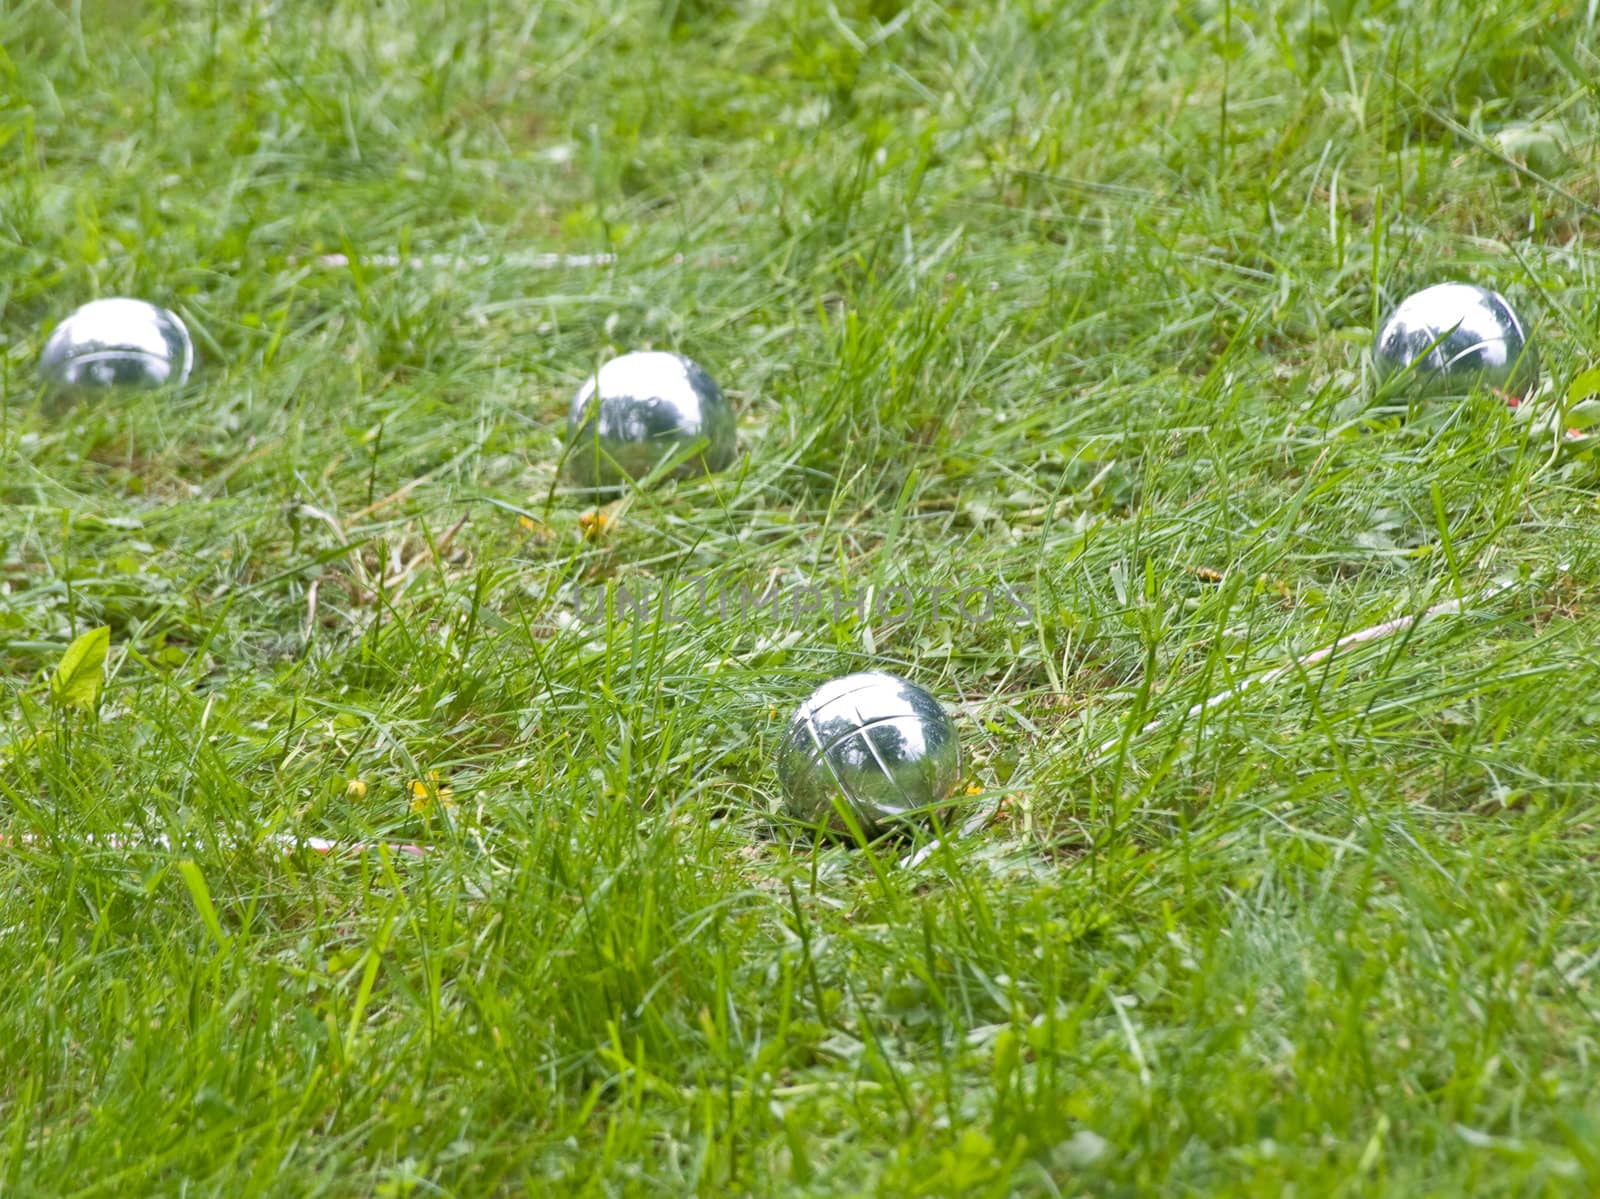 four shiny metall balls on the green grass